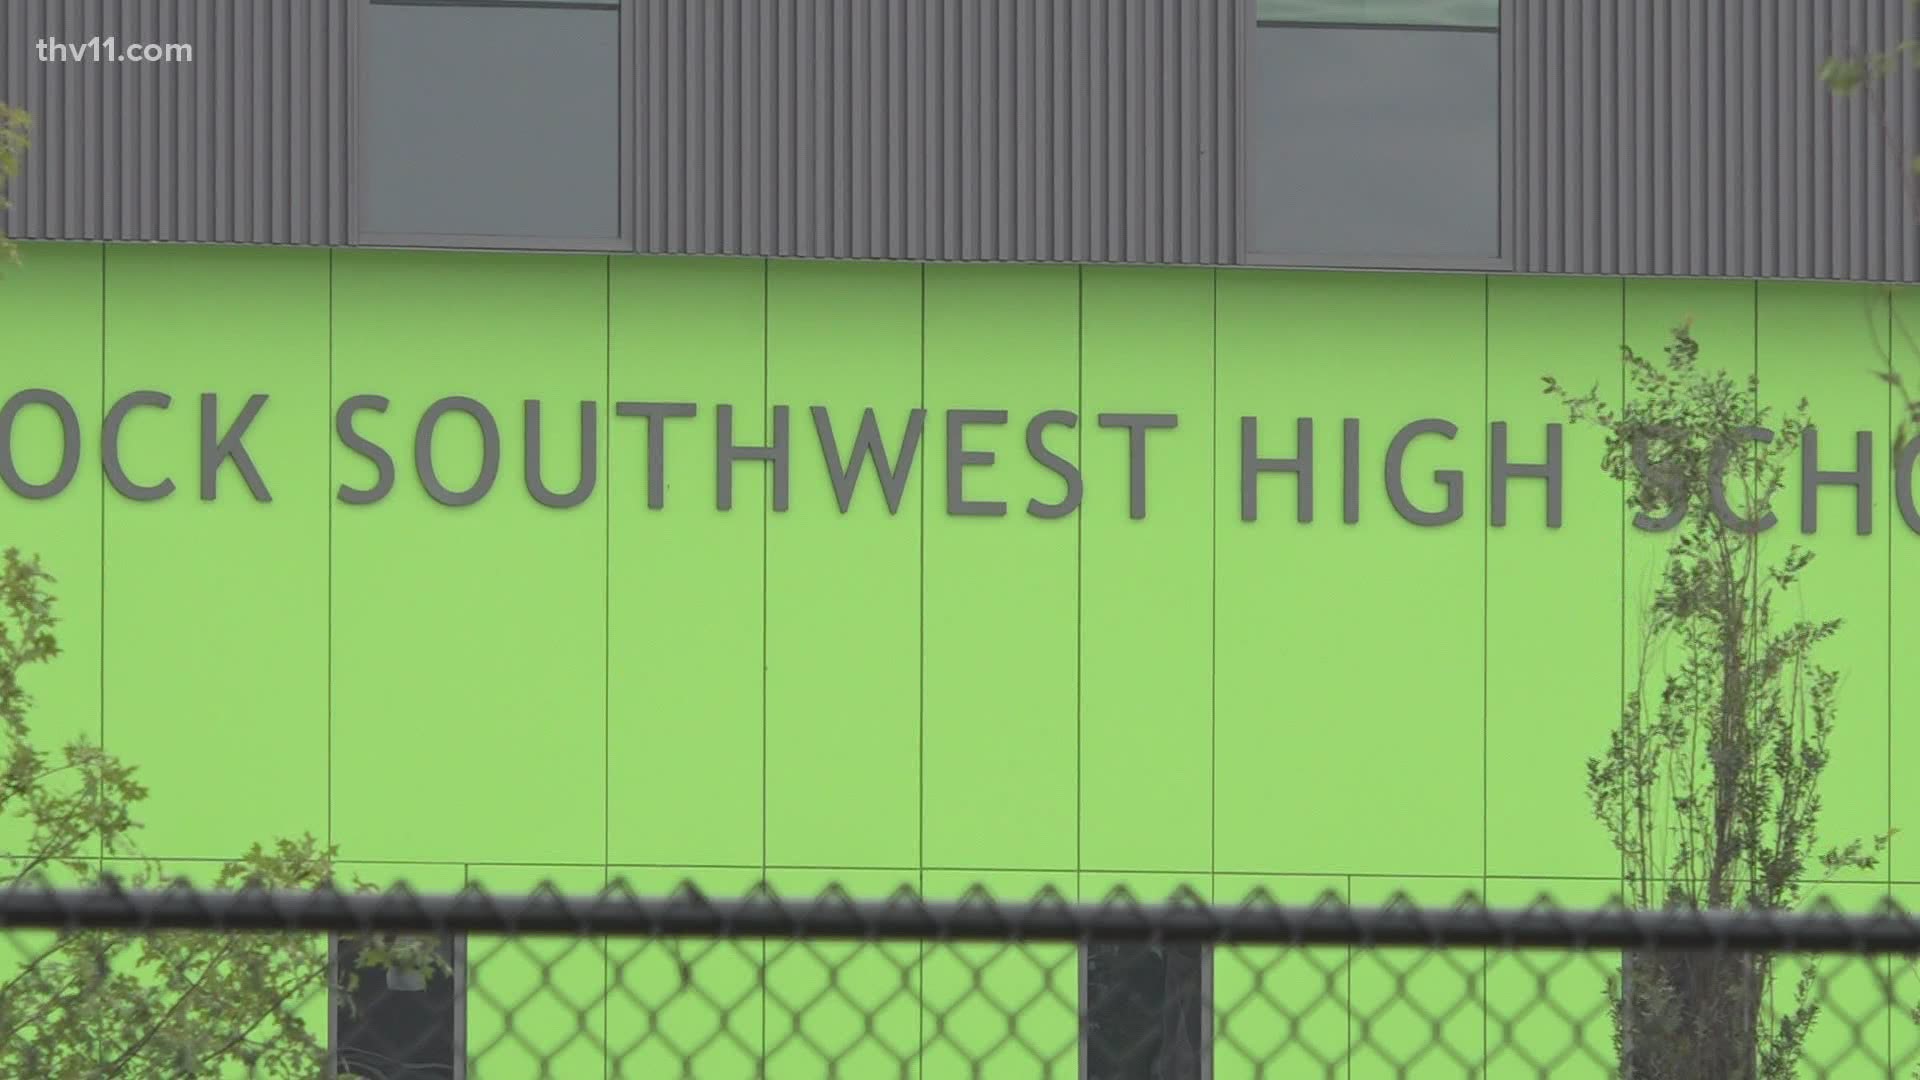 Little Rock Southwest High School switches to week of virtual learning after COVID exposure.